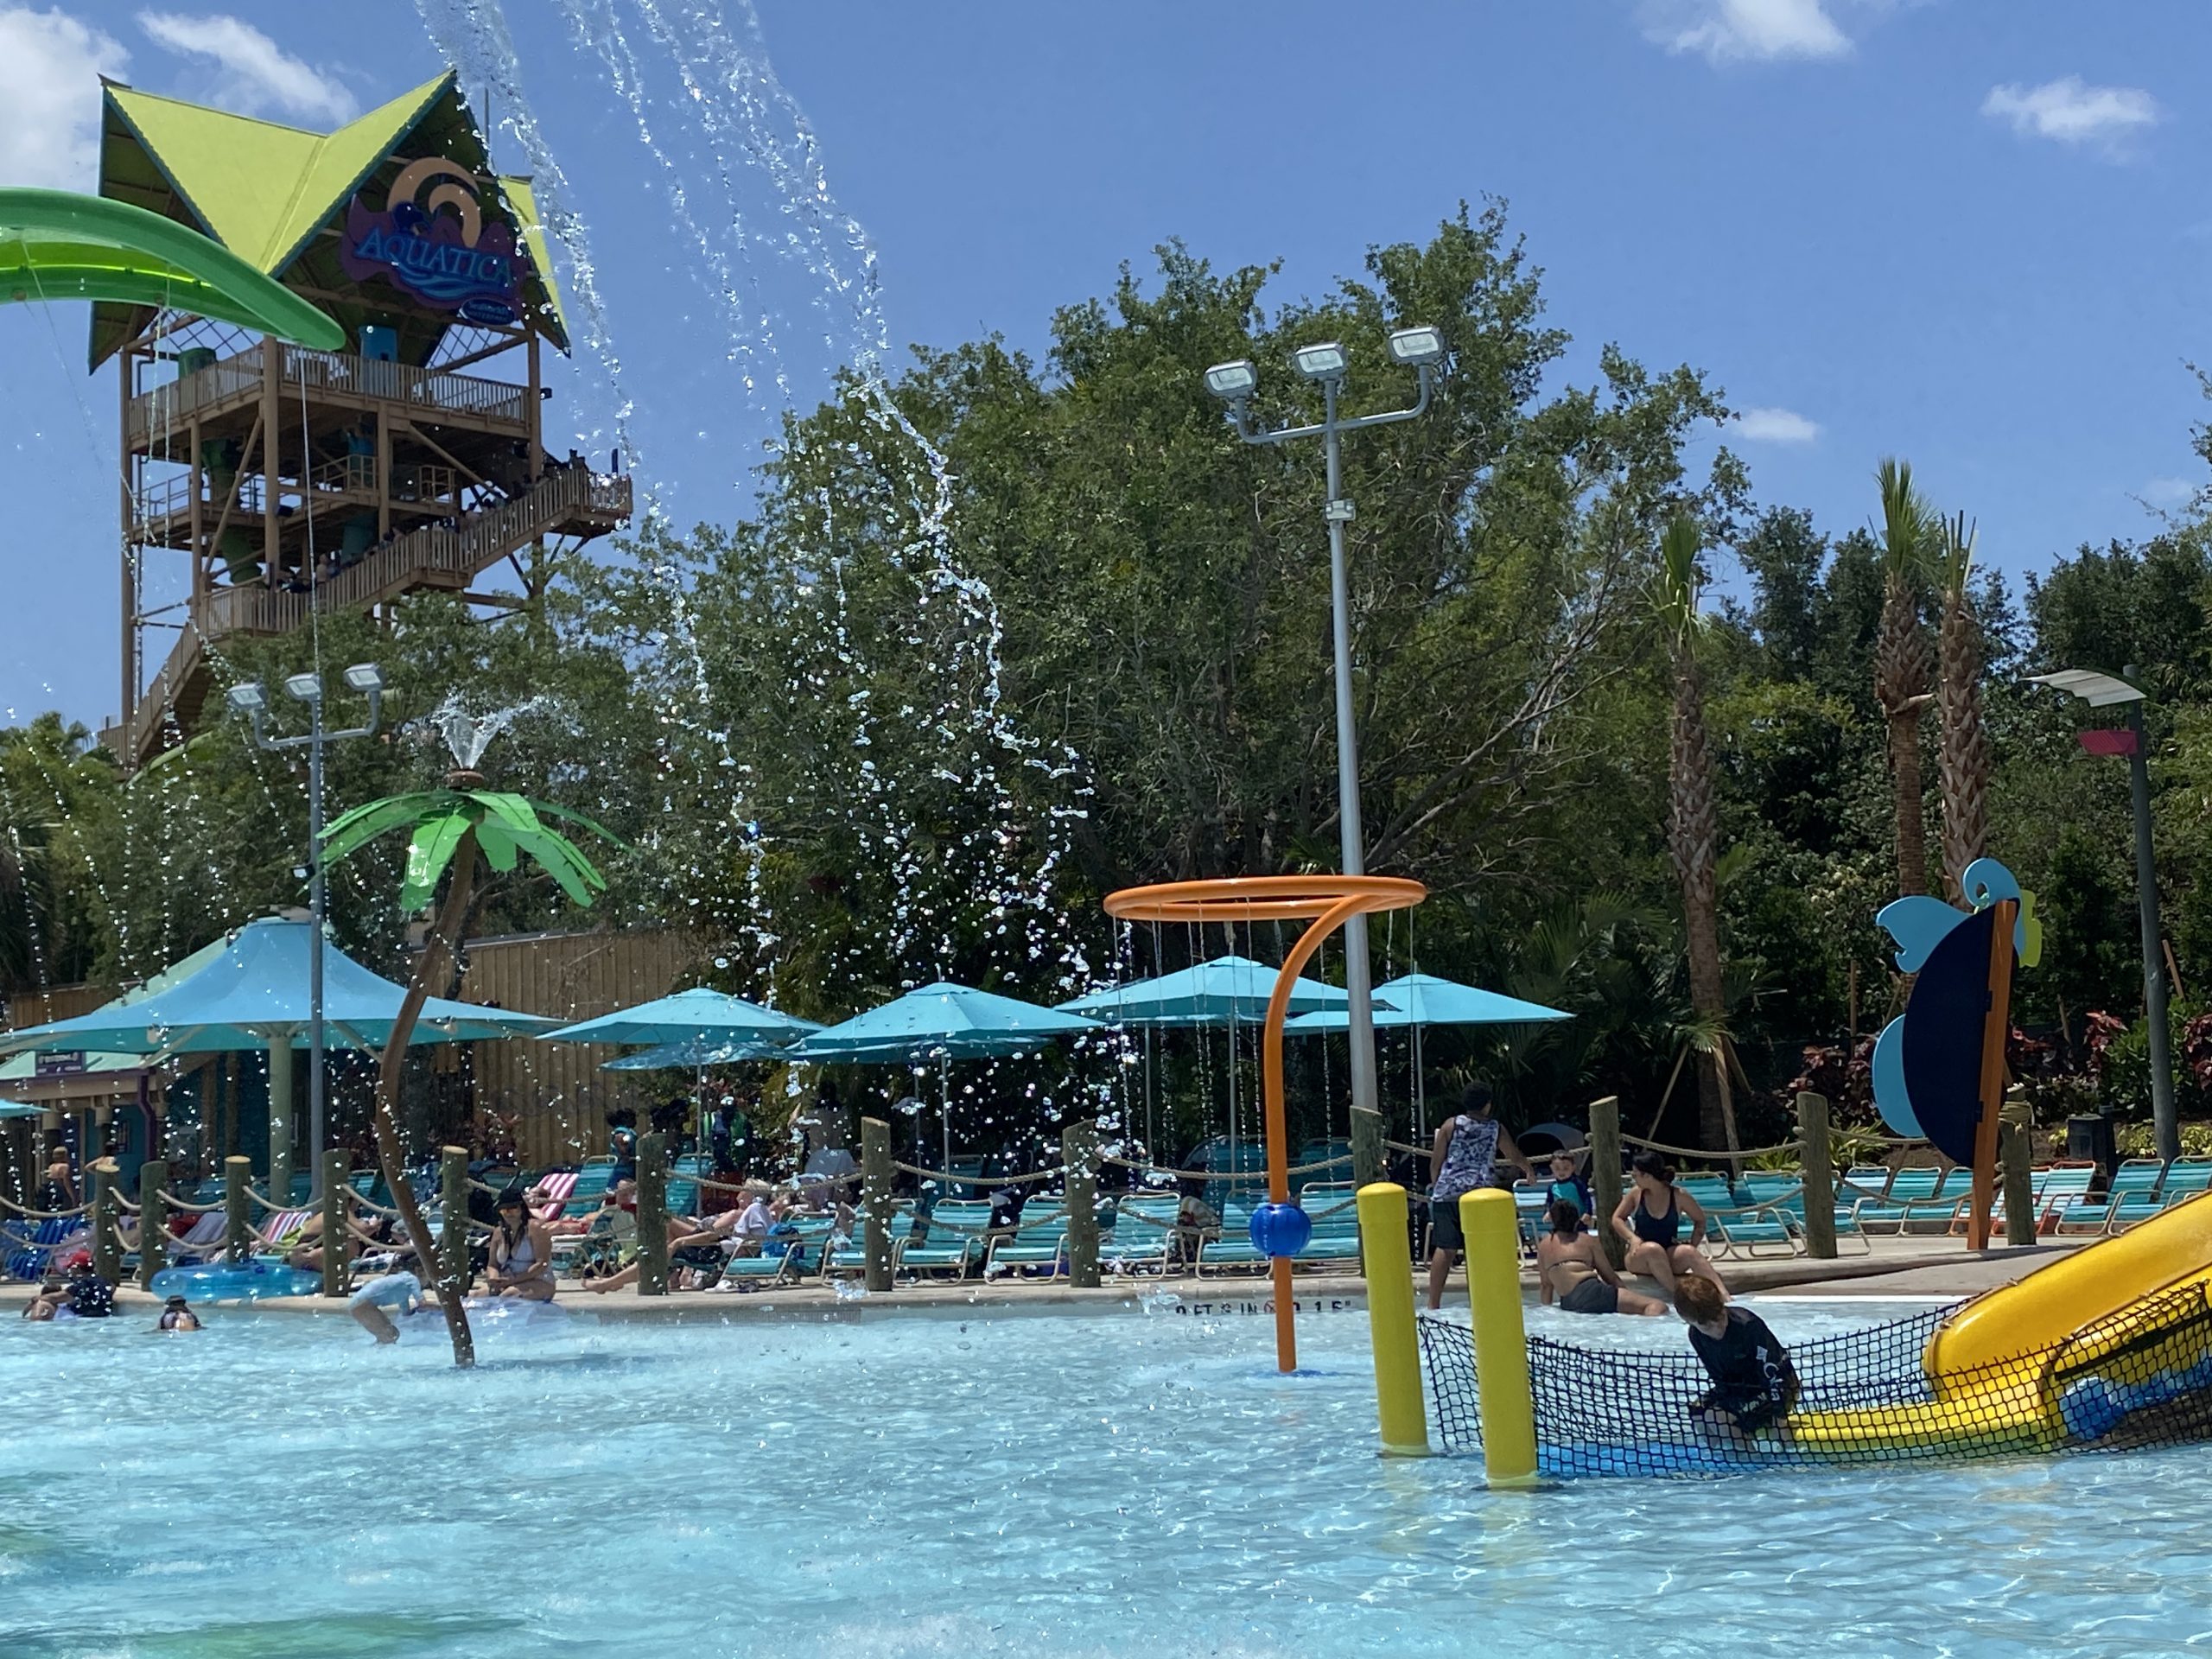 Slide tower and interactive water features at Aquatica Turi's Kids Cove